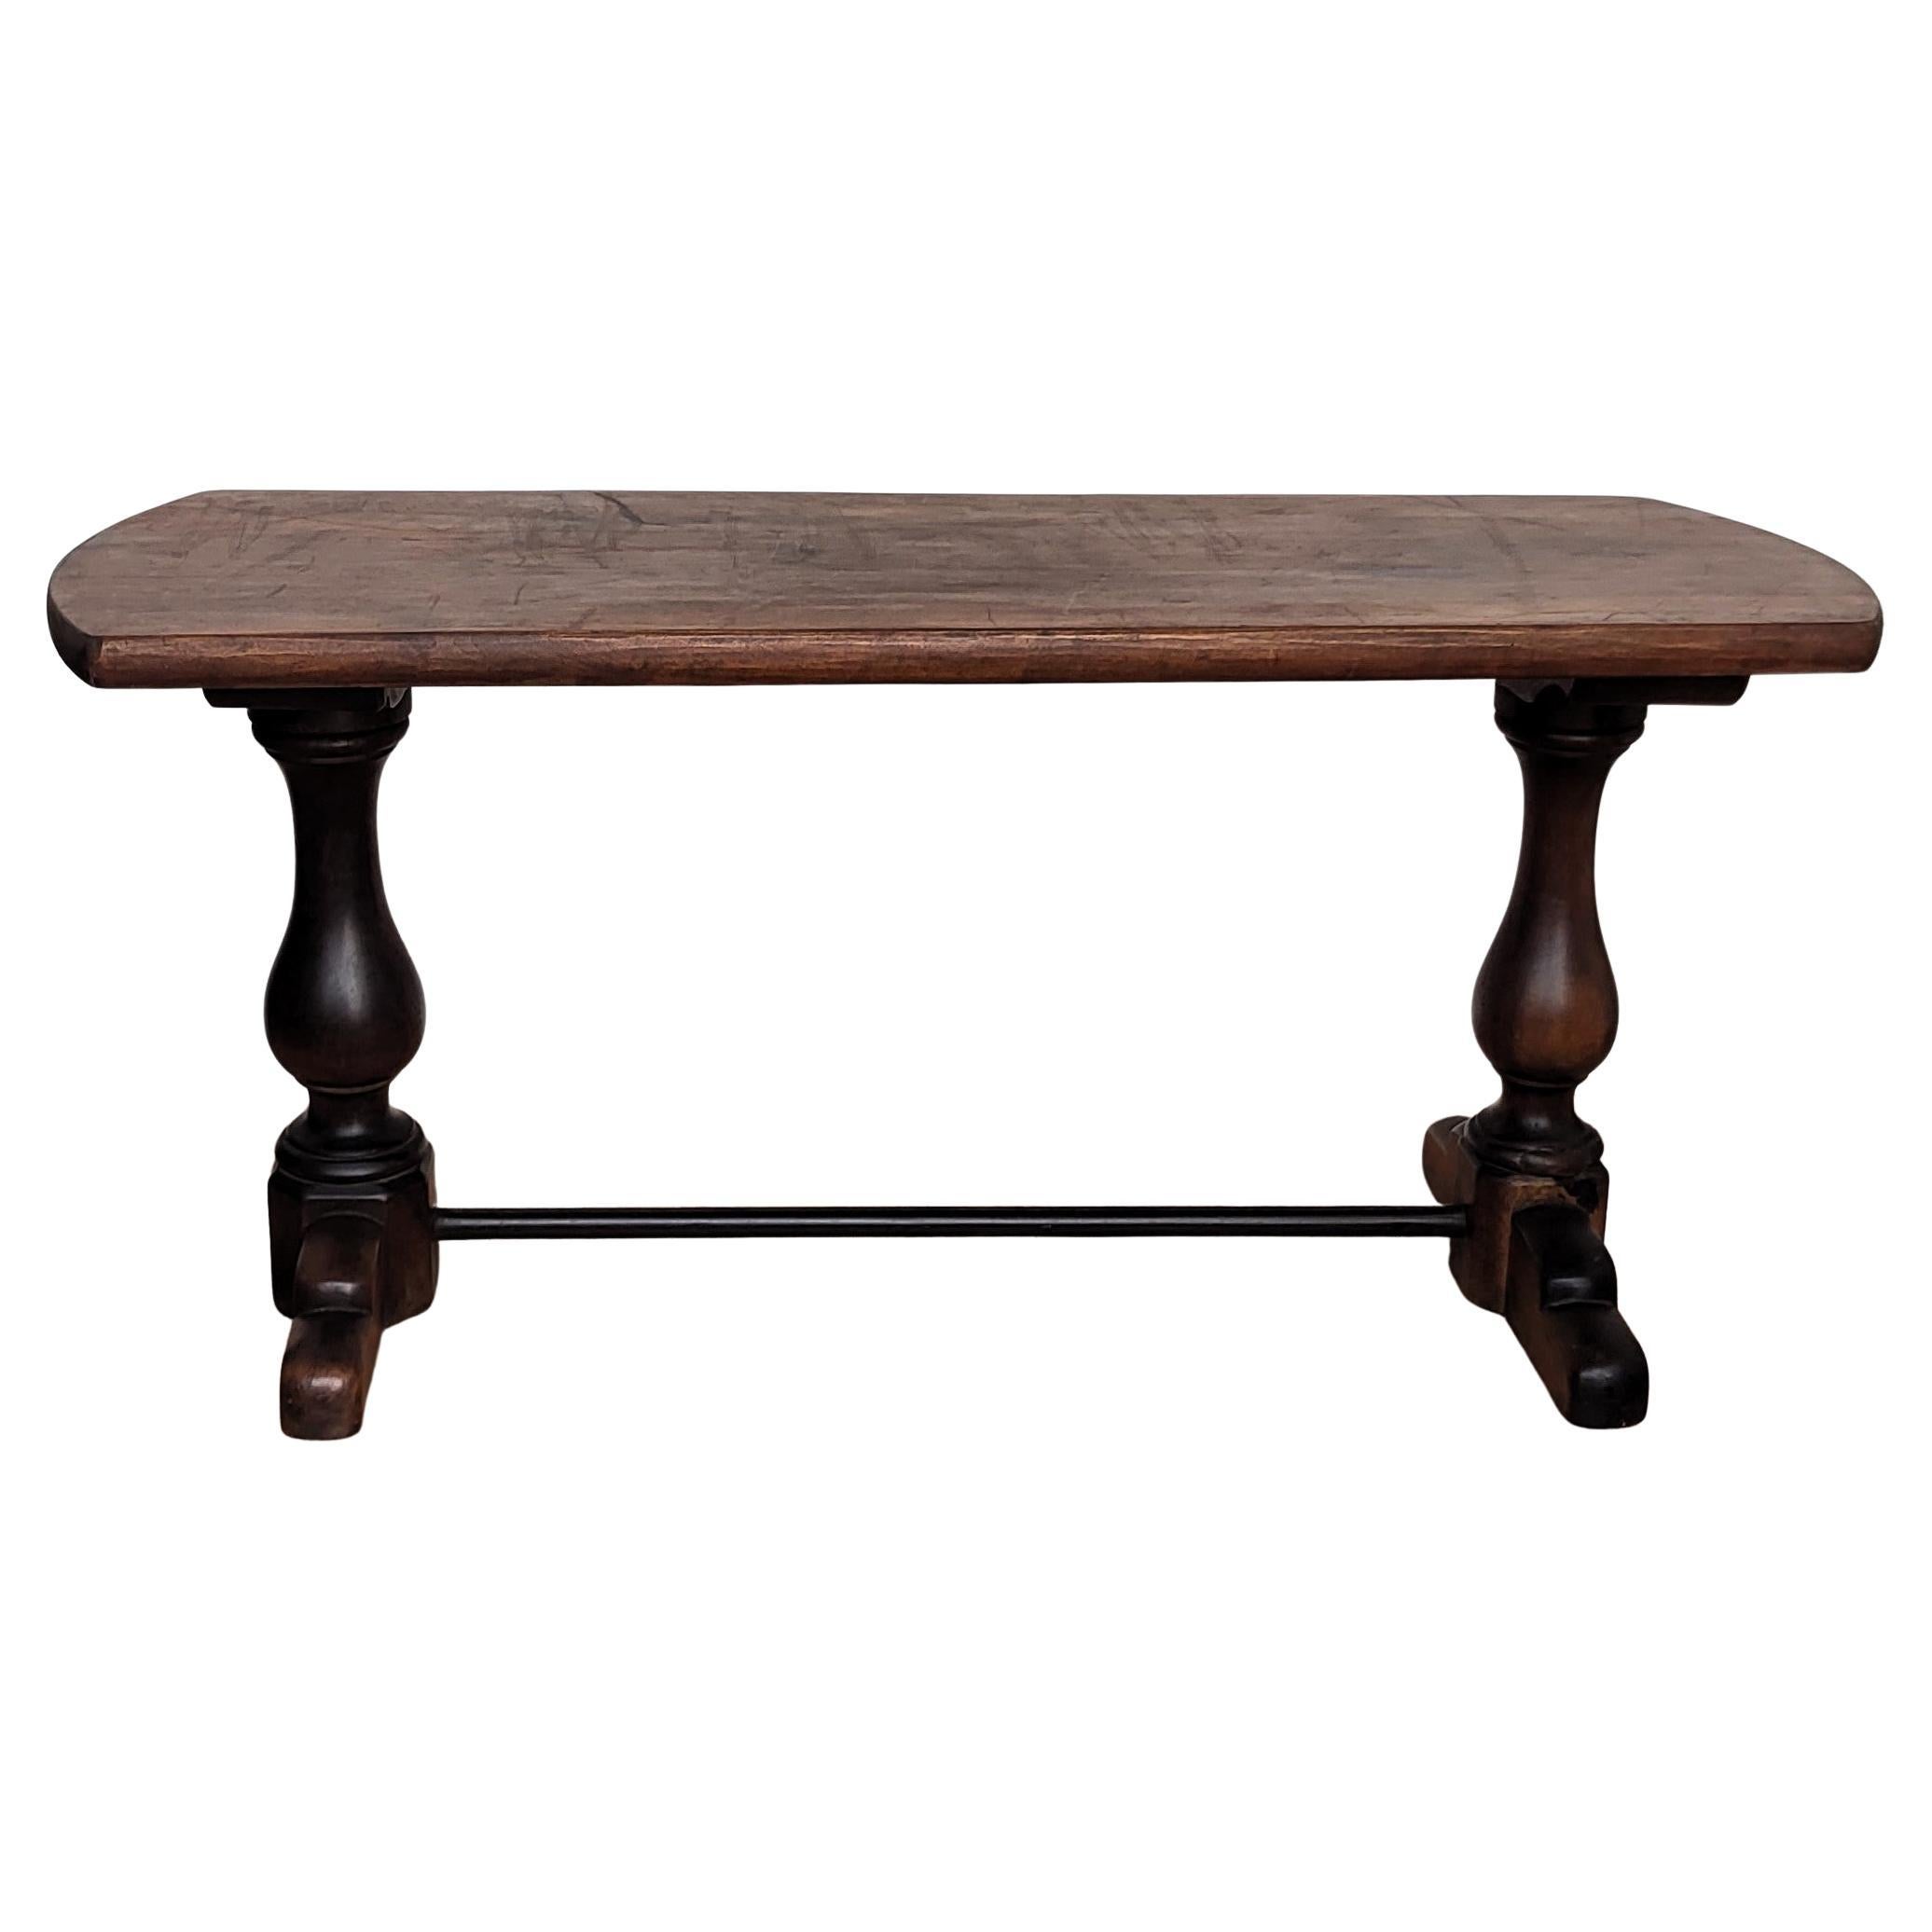 Antique Refectory Italian Solid Wooden Table